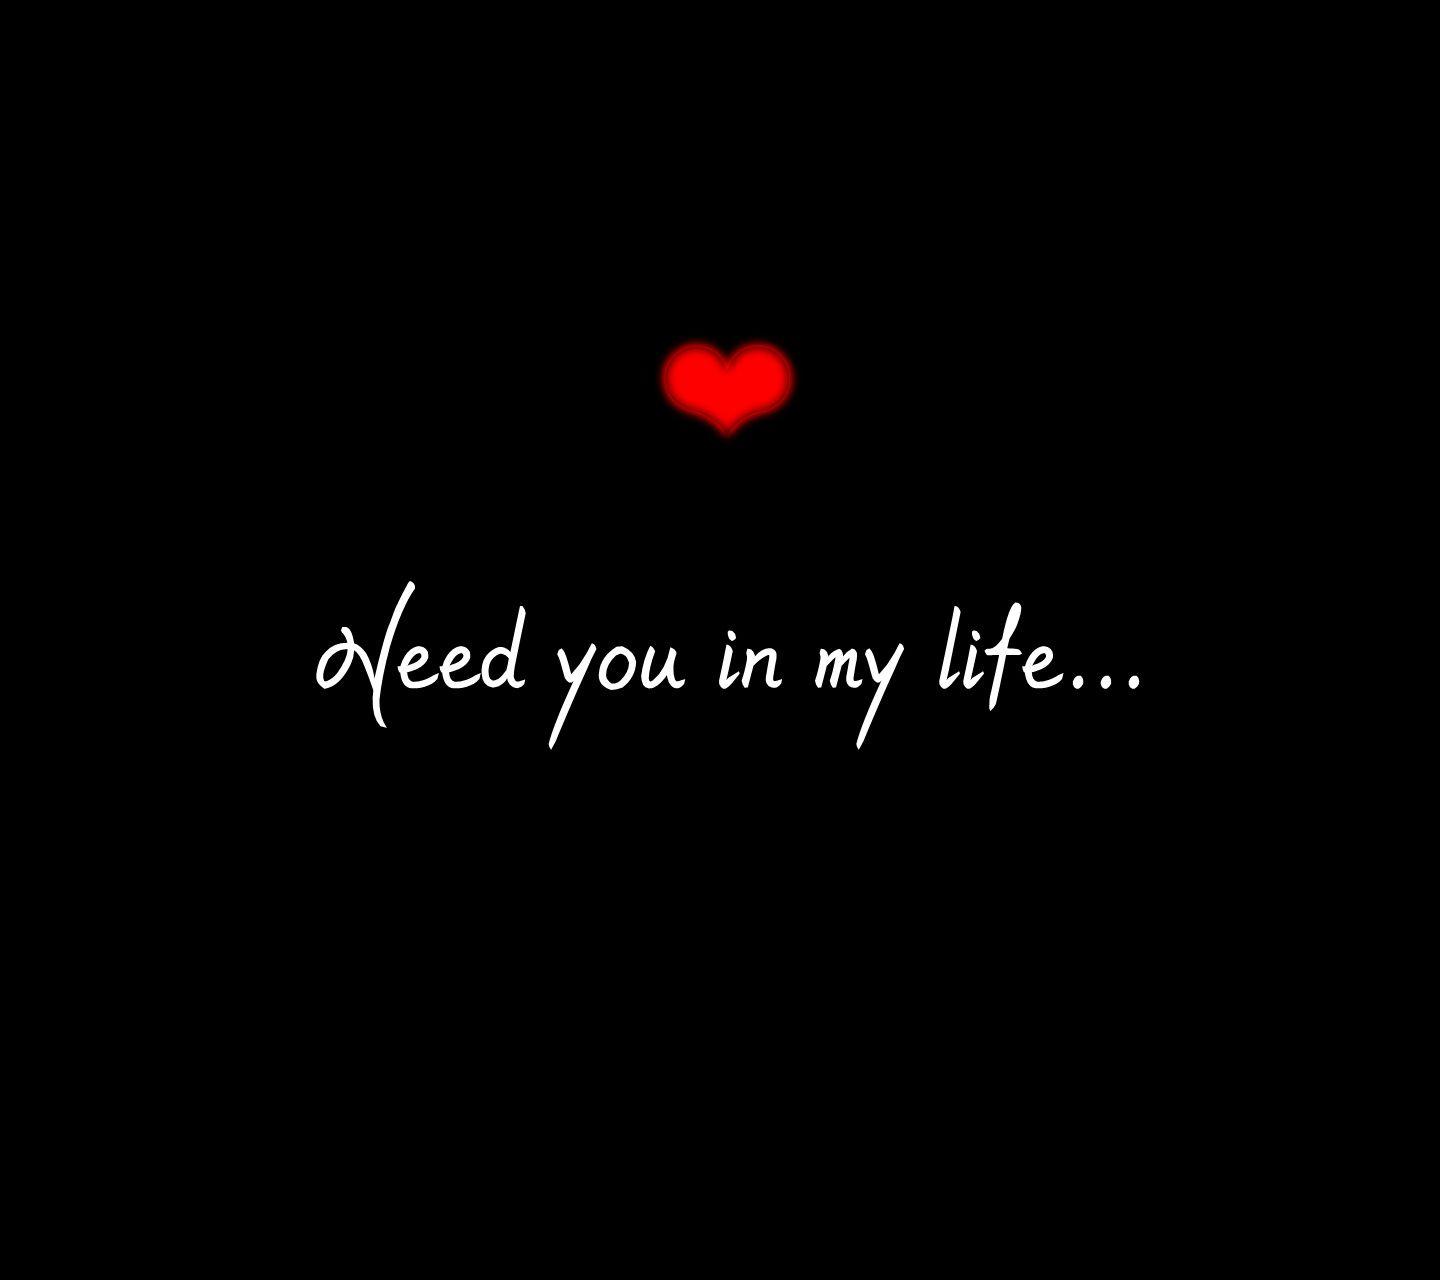 Quote: Need you in my life